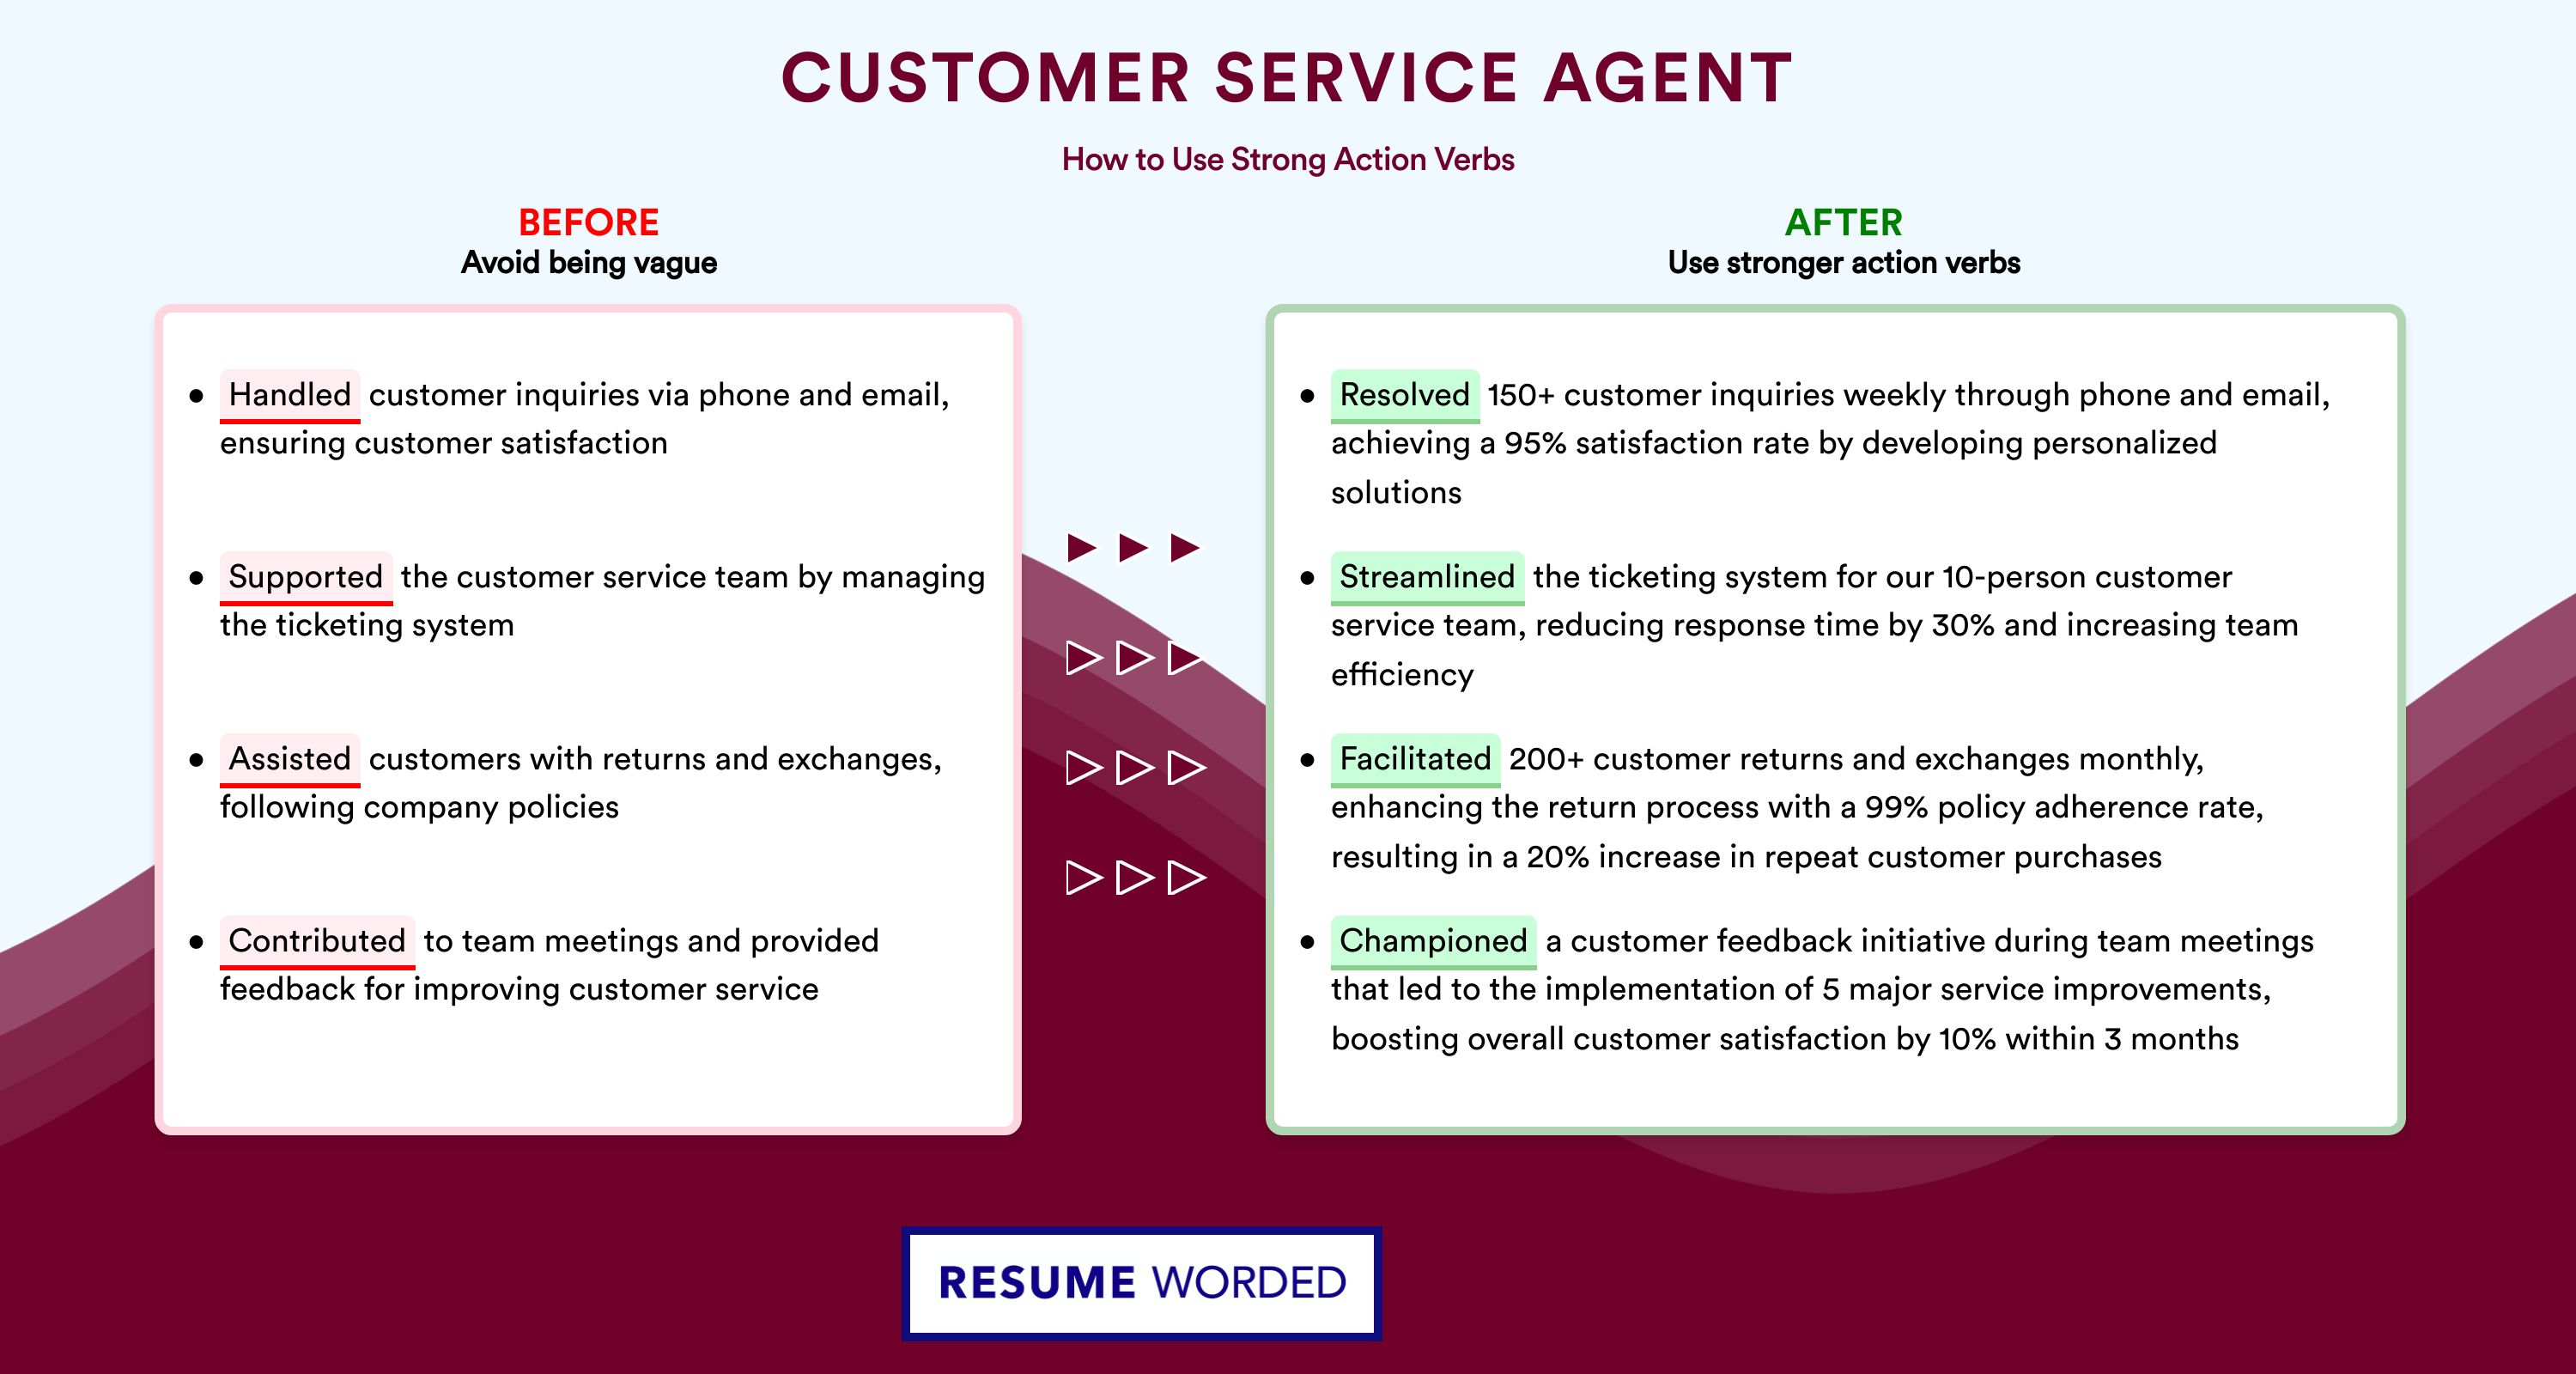 Action Verbs for Customer Service Agent